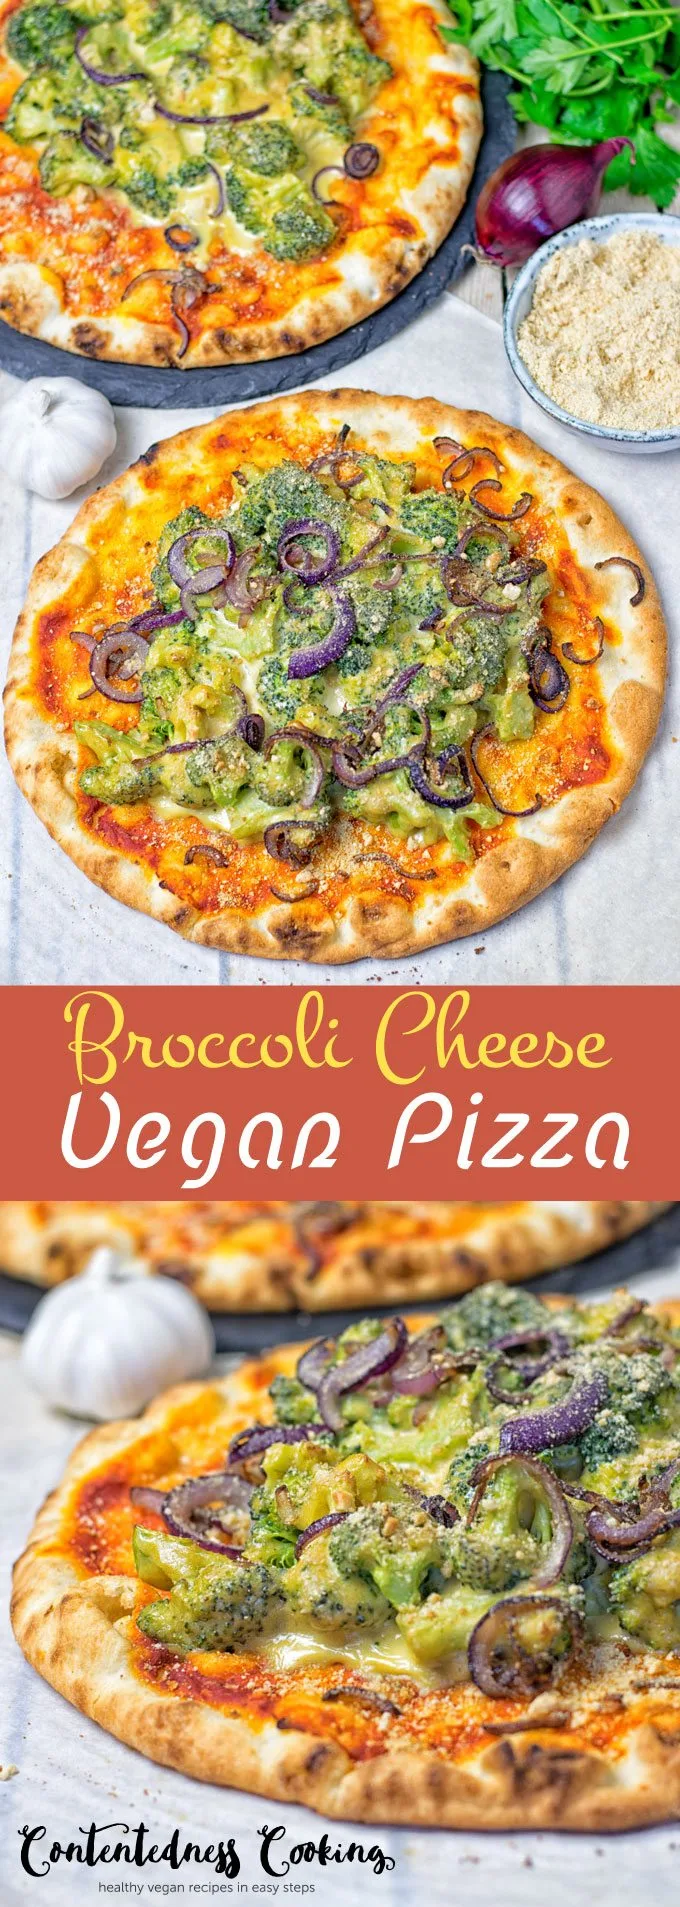 Collage of two pictures of Broccoli Cheese Vegan Pizza with recipe title text.